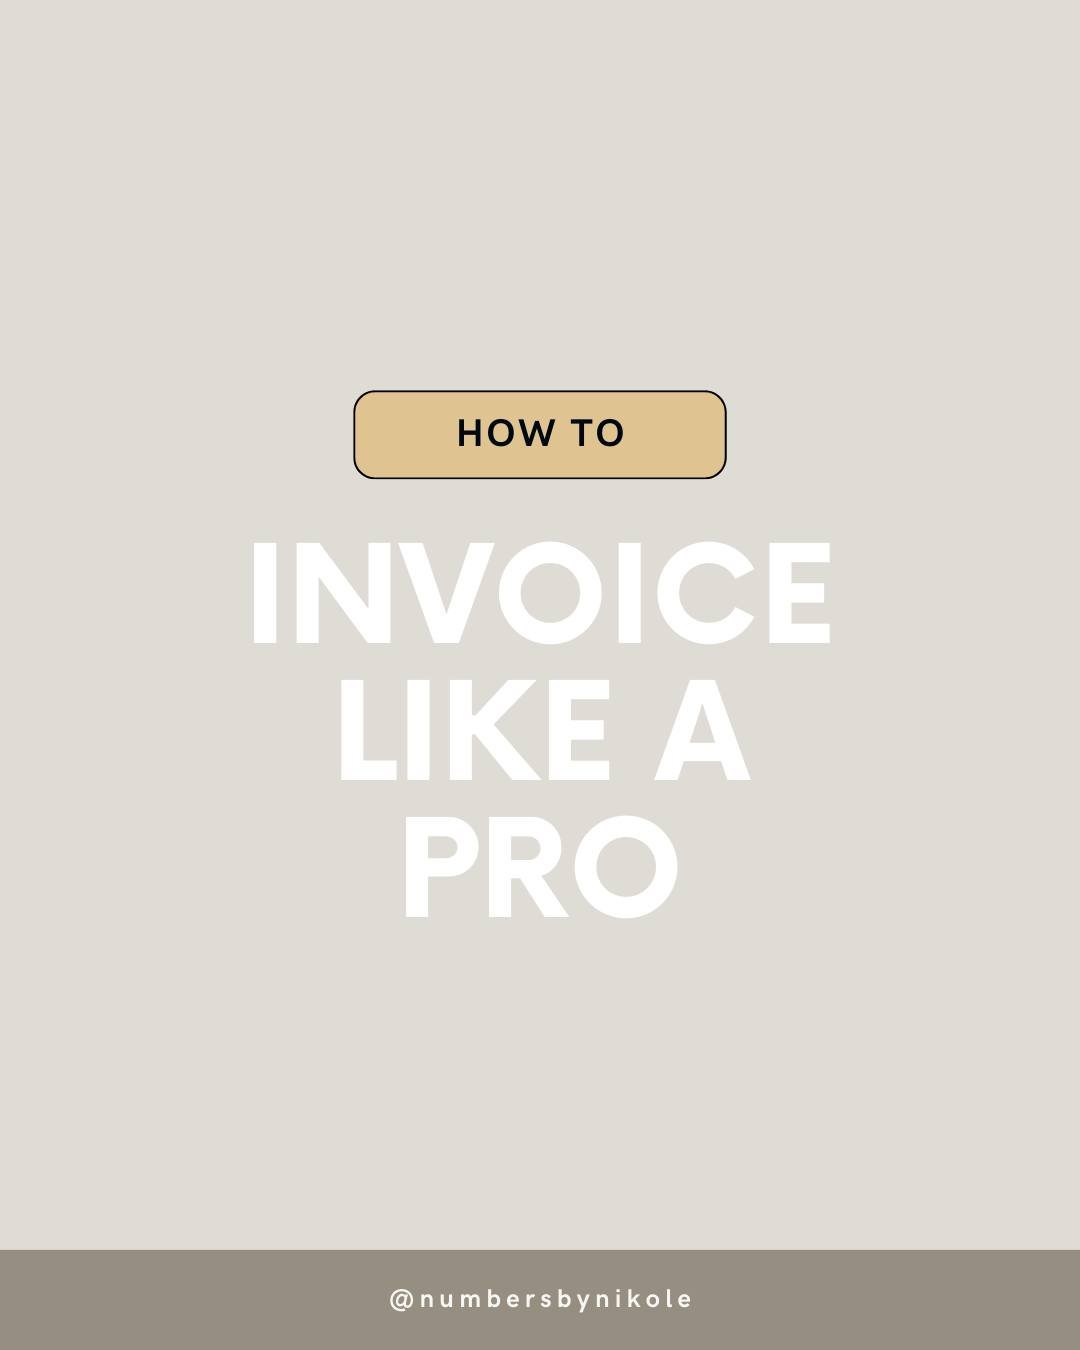 Ready to send invoices like you were born to do it?! 💸

Use these SIX tips on every invoice you send to make getting paid easy for everyone involved.

P.S. Tip #6 will save you HOURS on invoicing! ⌛

#bookkeeper #bookkeepertips #bookkeeping #bookkee